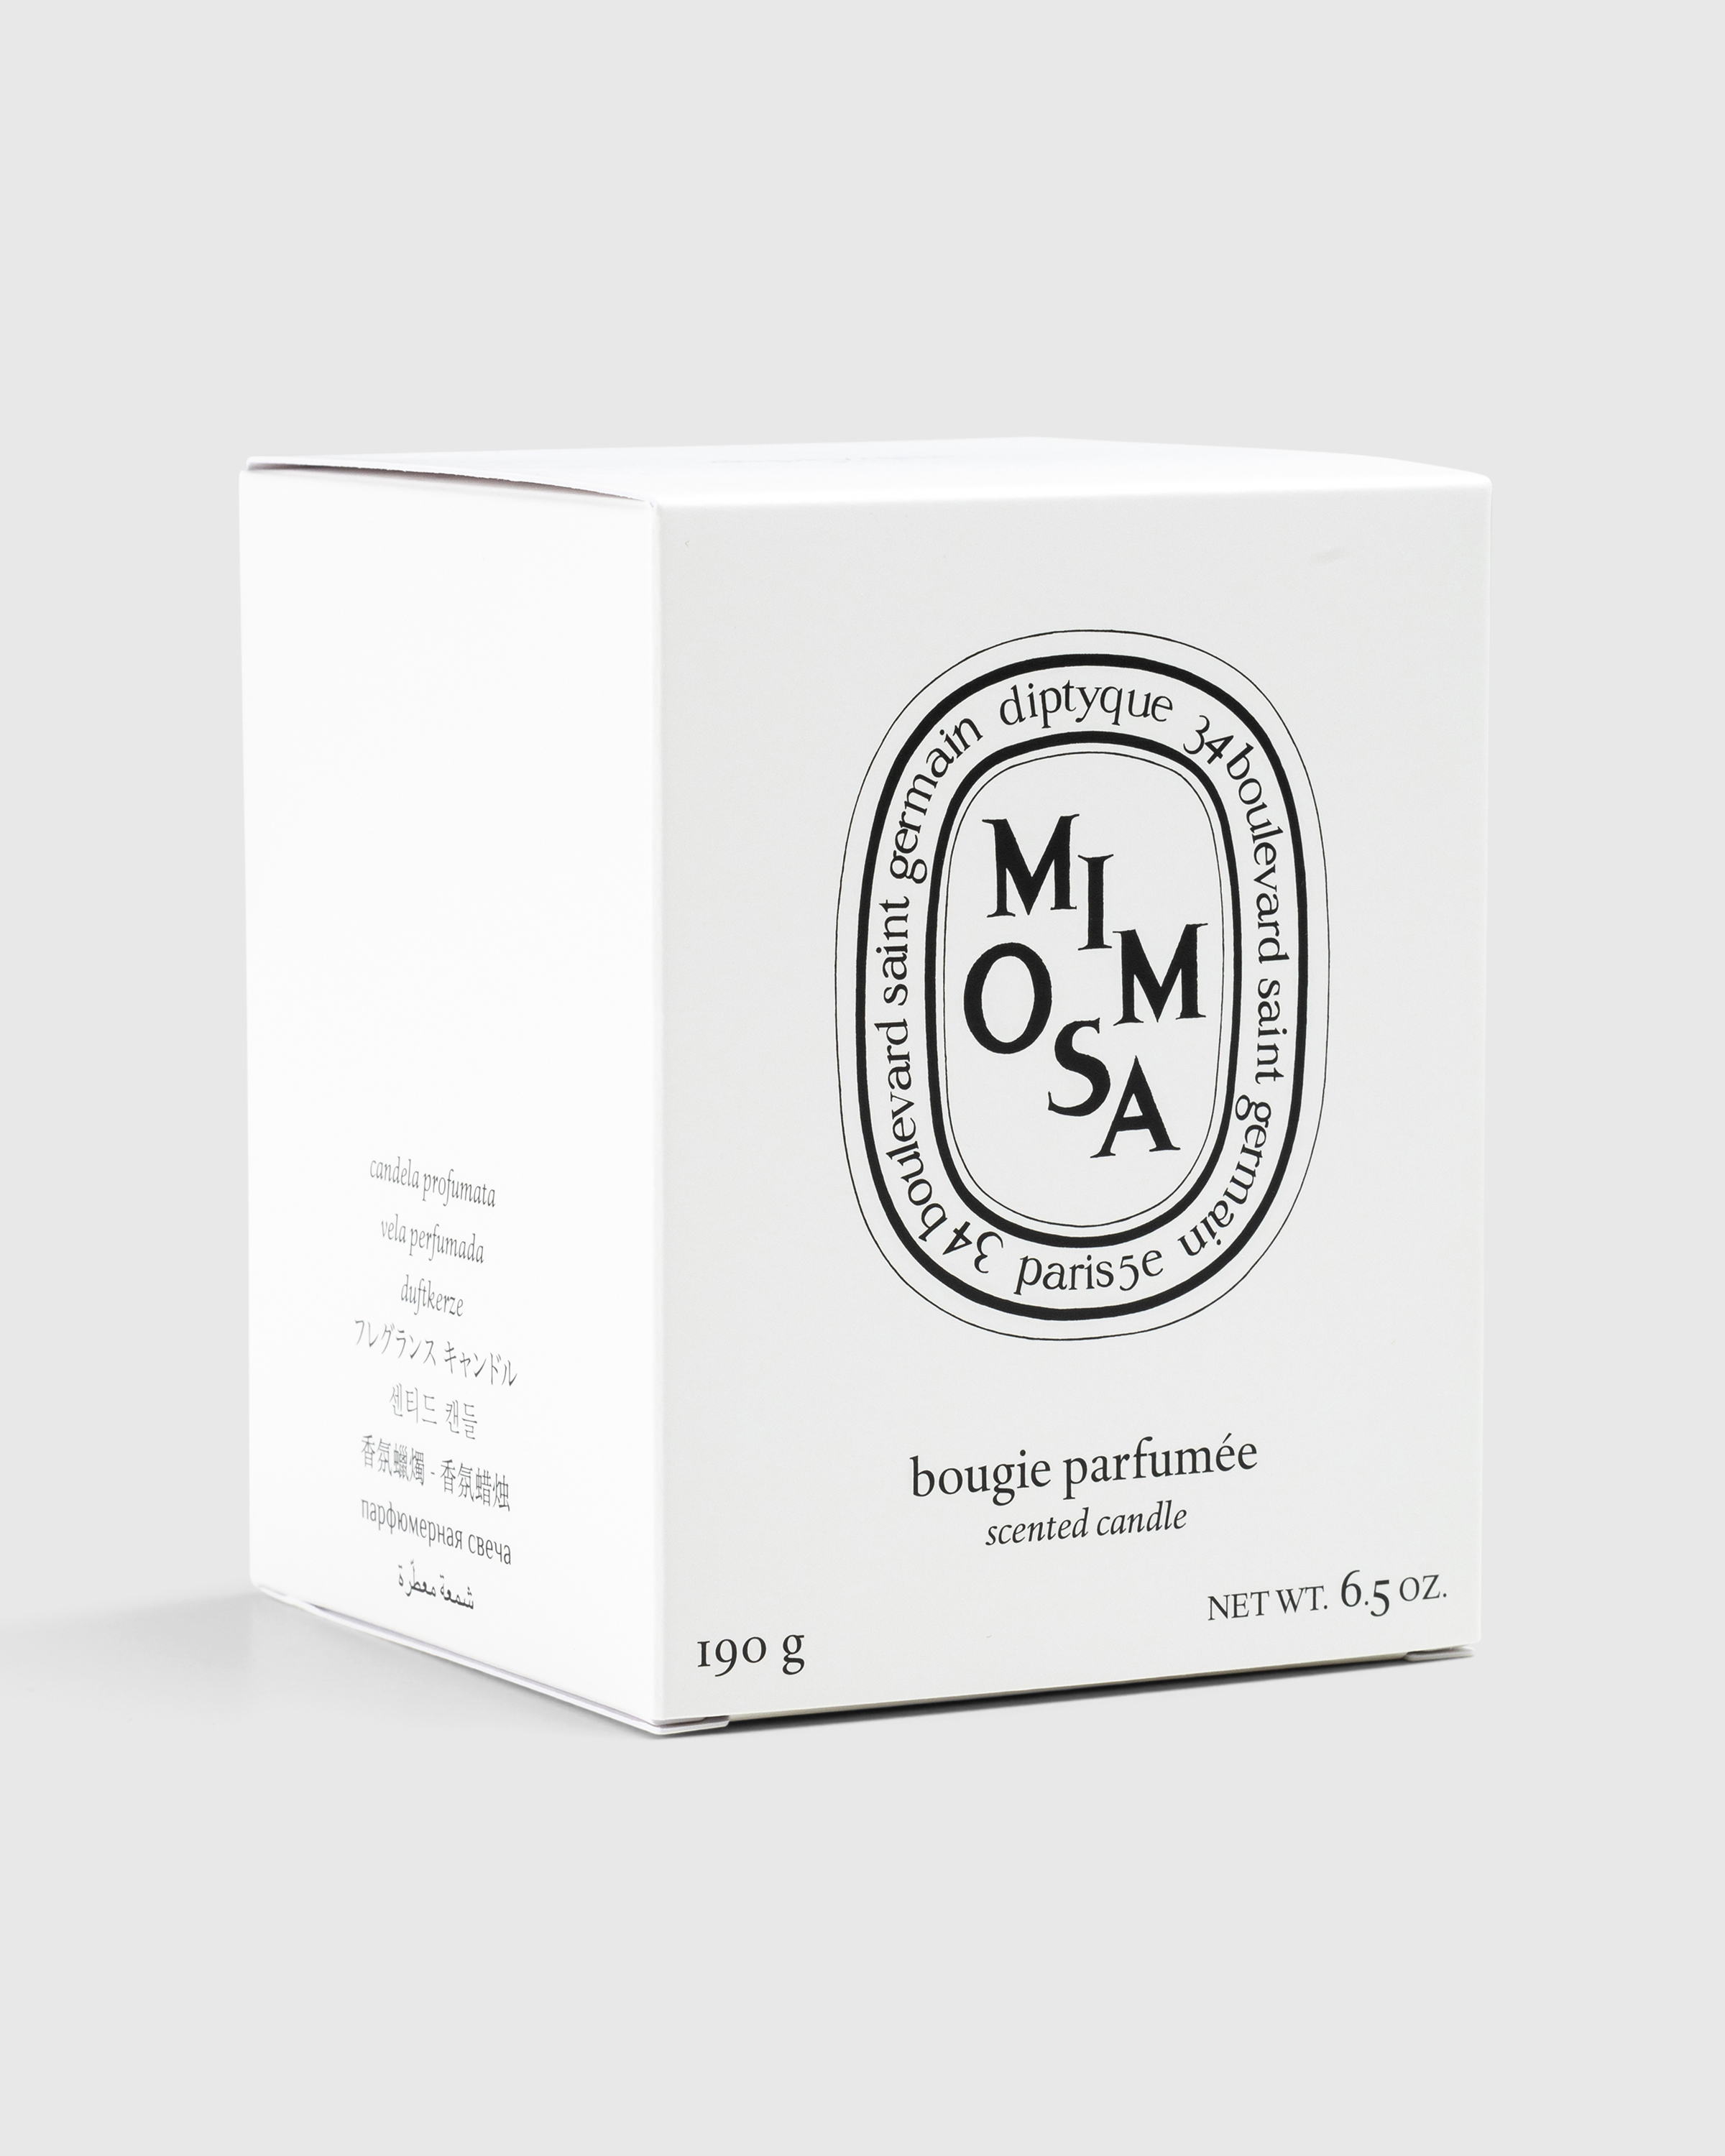 Diptyque – Standard Candle Mimosa 190g - Candles & Fragrances - Transparent - Image 3